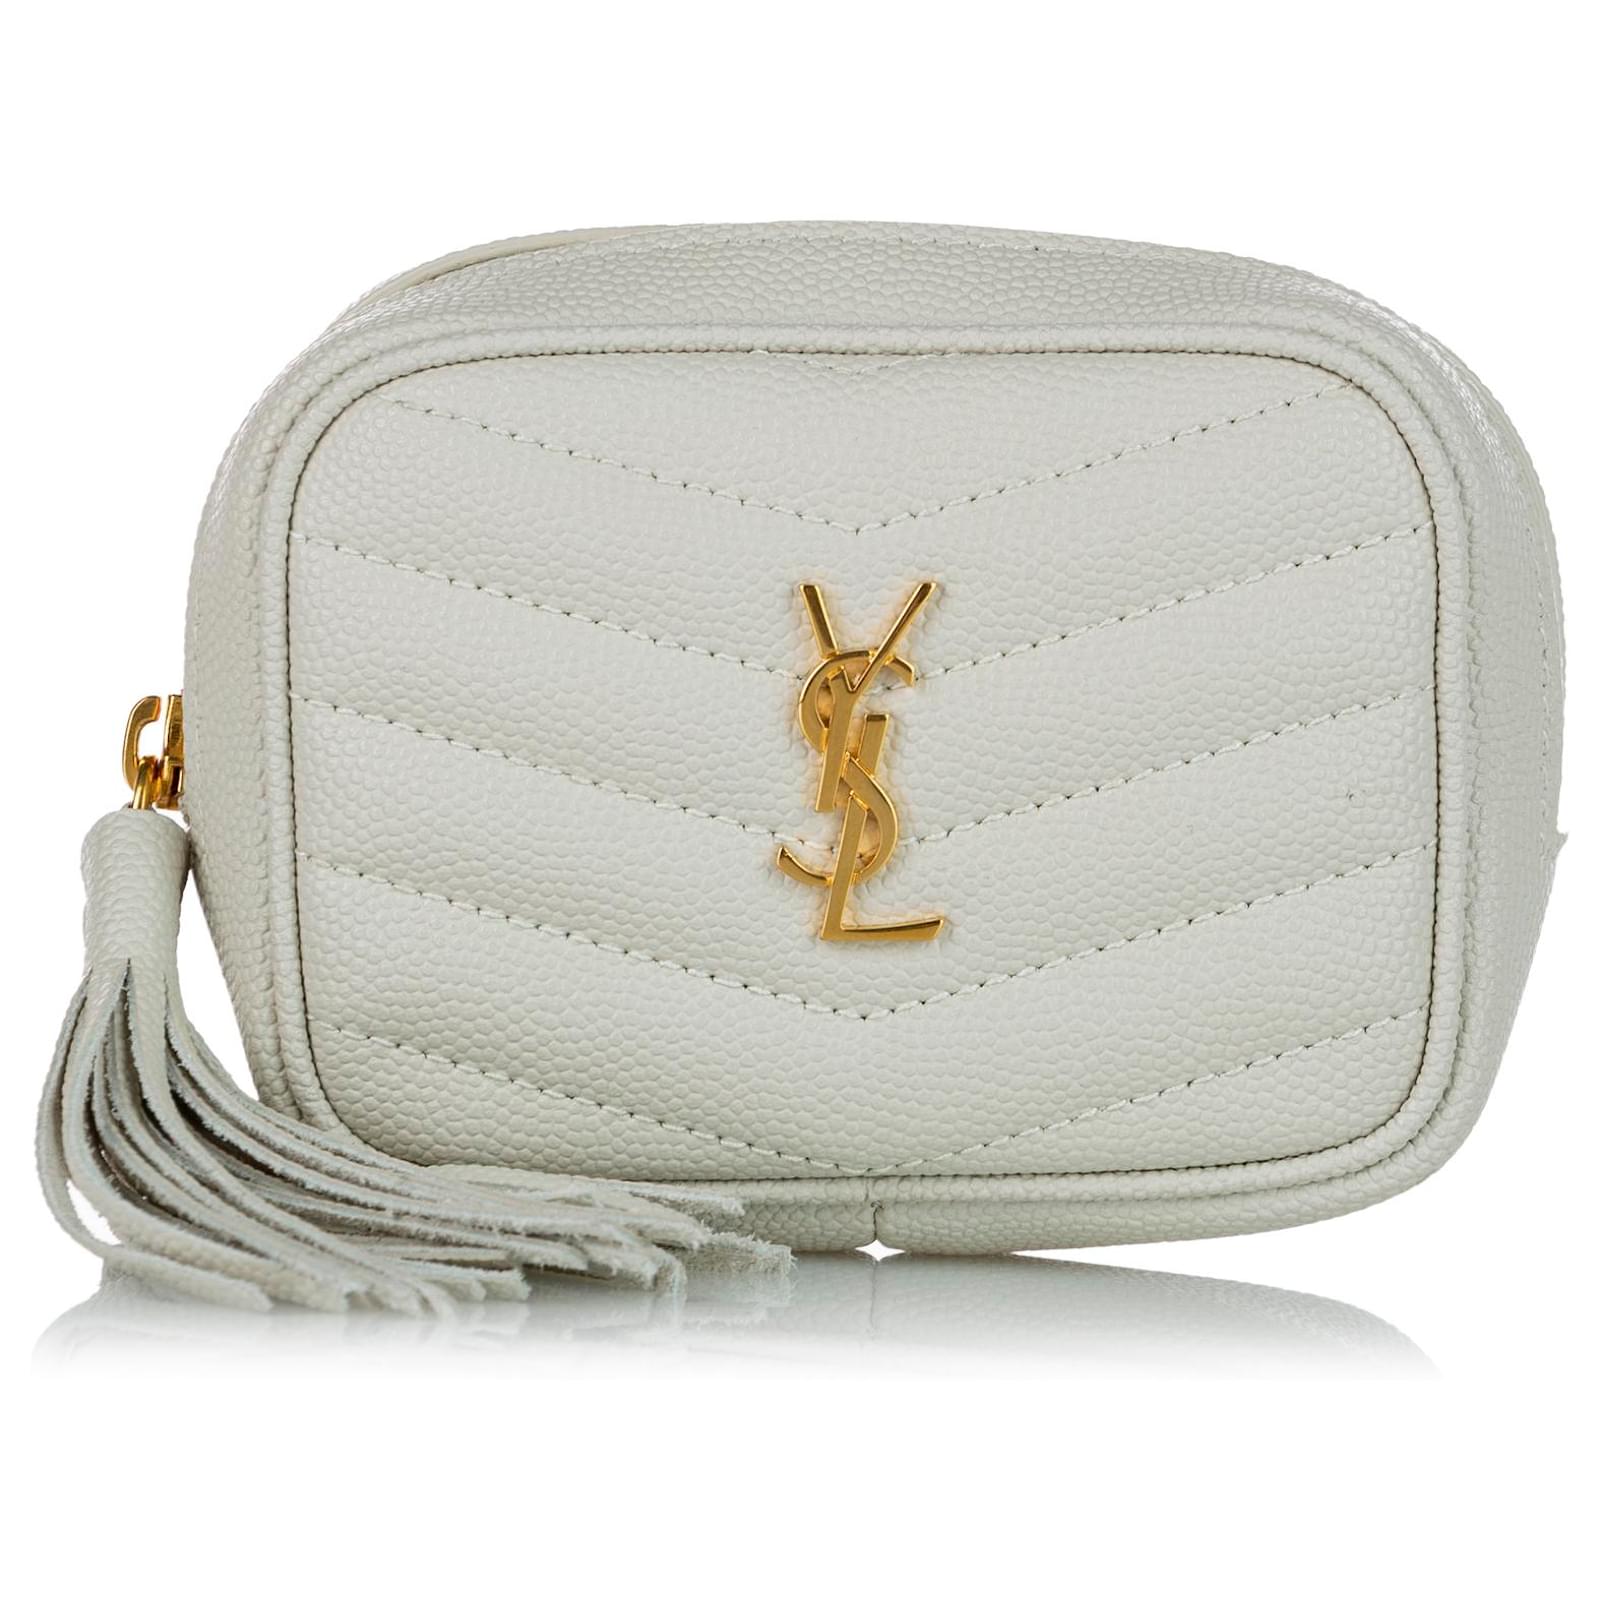 How To Style A YSL Lou Bag